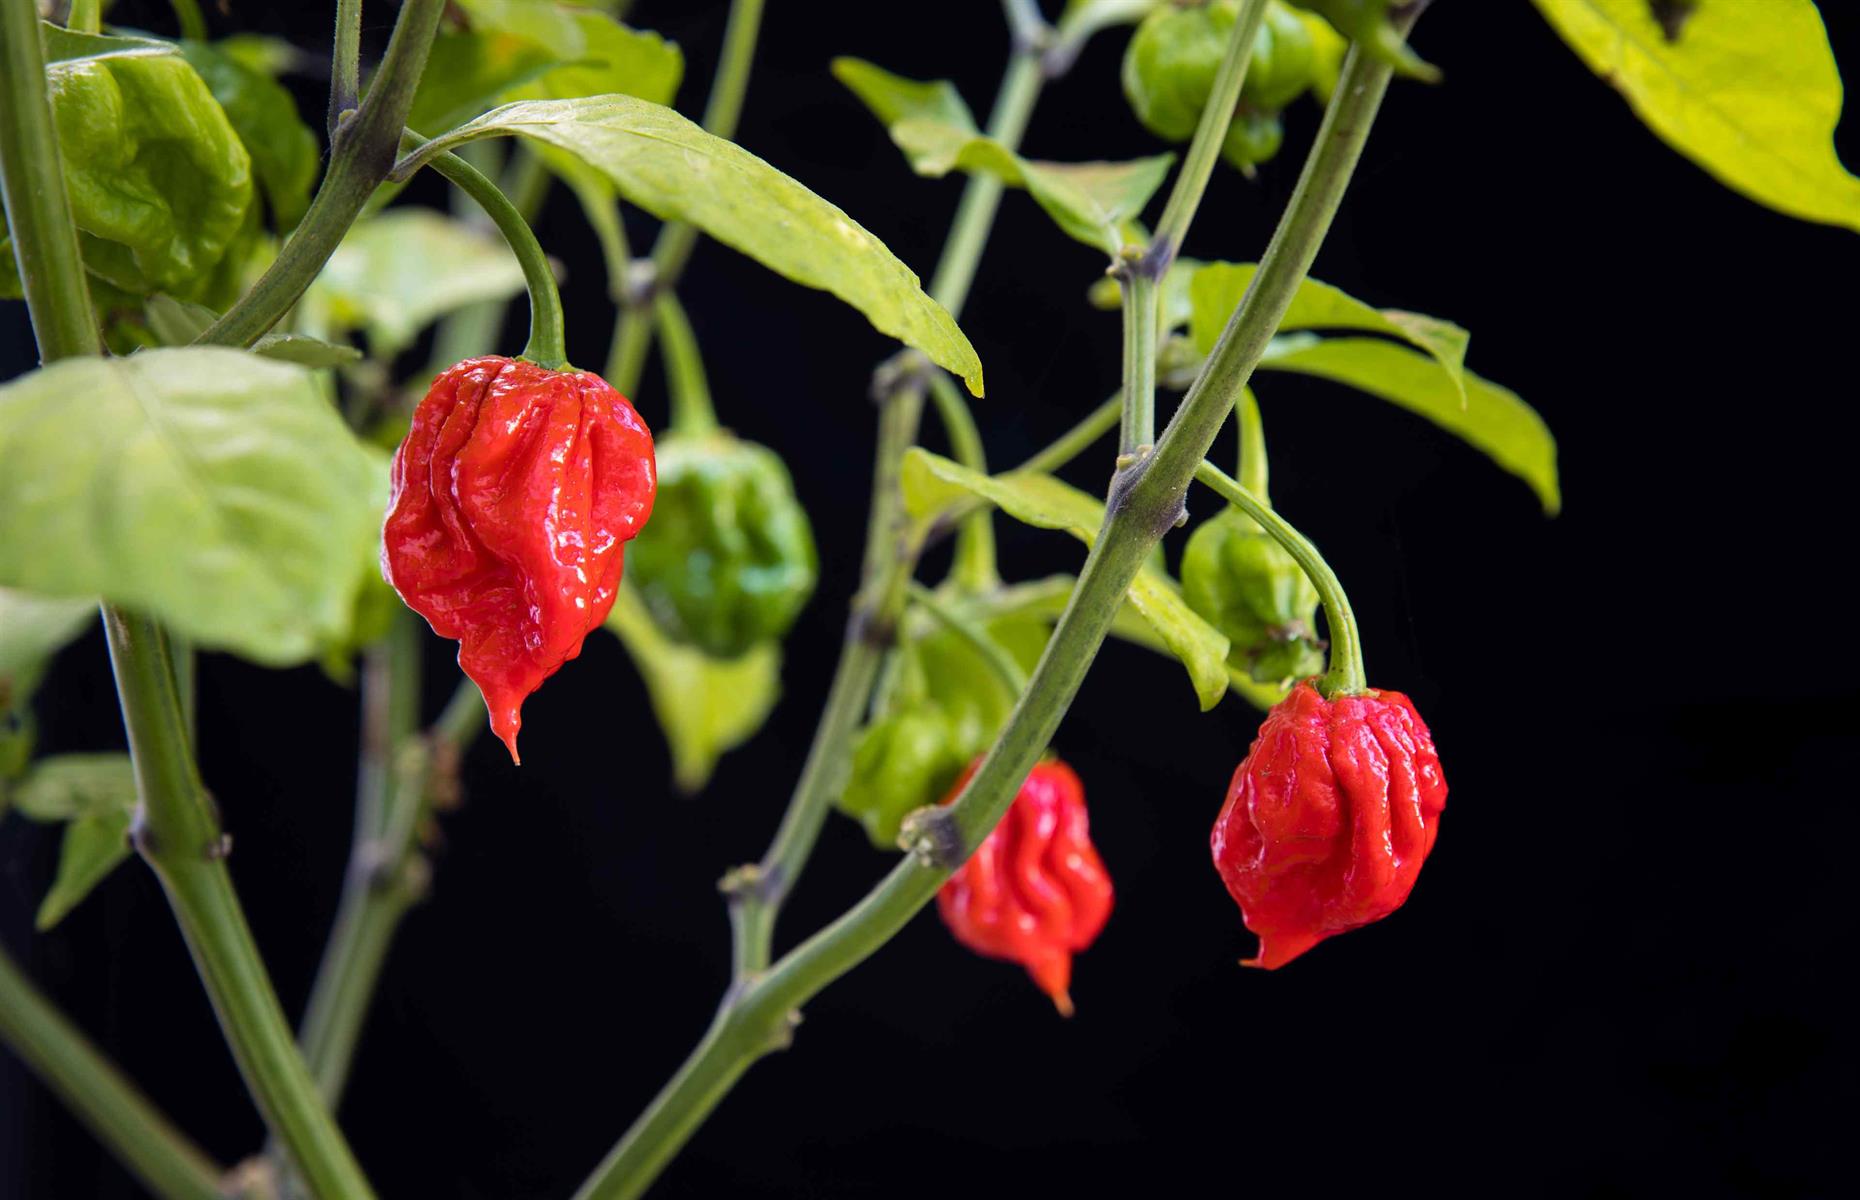 <p>To determine how hot a particular chili is, it's measured on the Scoville Scale (which is a measurement of the pungency), which was invented by a clever chap called Wilbur Scoville. It measures the heat by the amount of capsaicin in the chili – the compound which gives chilies their sting. Poblano chilies are one of the mildest, measuring 1,000-3,500 SHU (Scoville heat units), to the terrifyingly hot Carolina reaper (pictured), which weighs in at 1,500,000-2,200,000 SHU.</p>